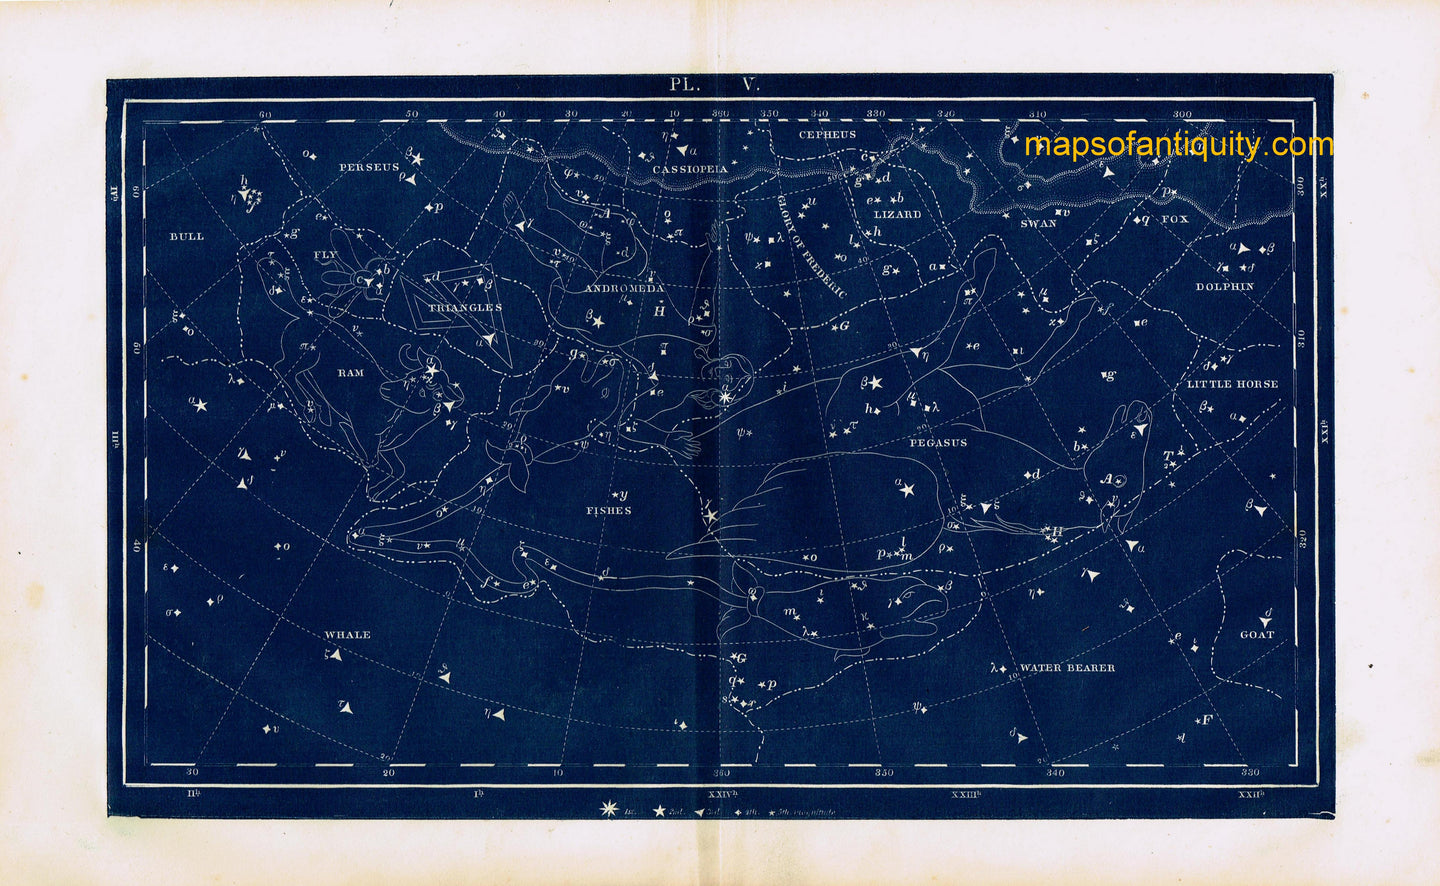 Antique-Printed-Color-Celestial-Map-Plate-V-with-Pegasus-Constellations-**********-Celestial--1846-Butler-Maps-Of-Antiquity